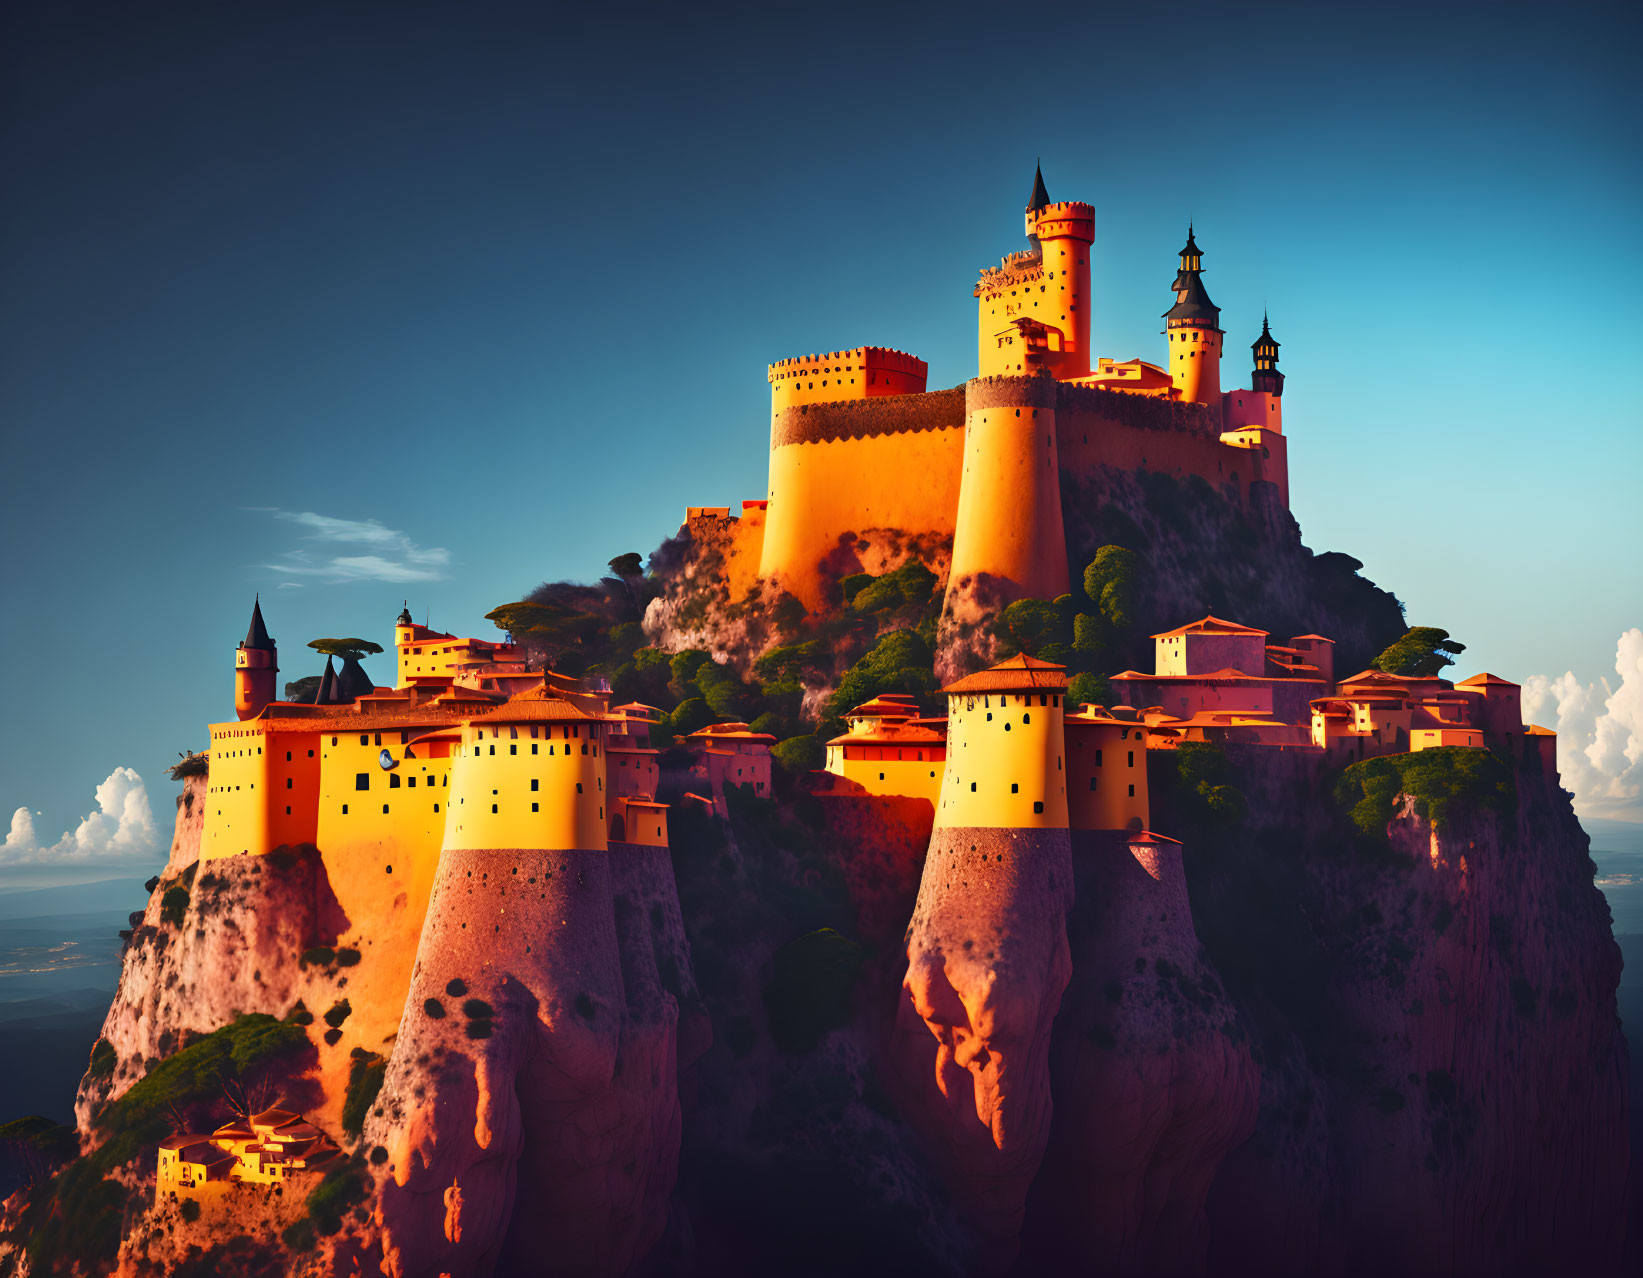 Majestic castle on rugged cliffs with towers under dramatic sunset sky